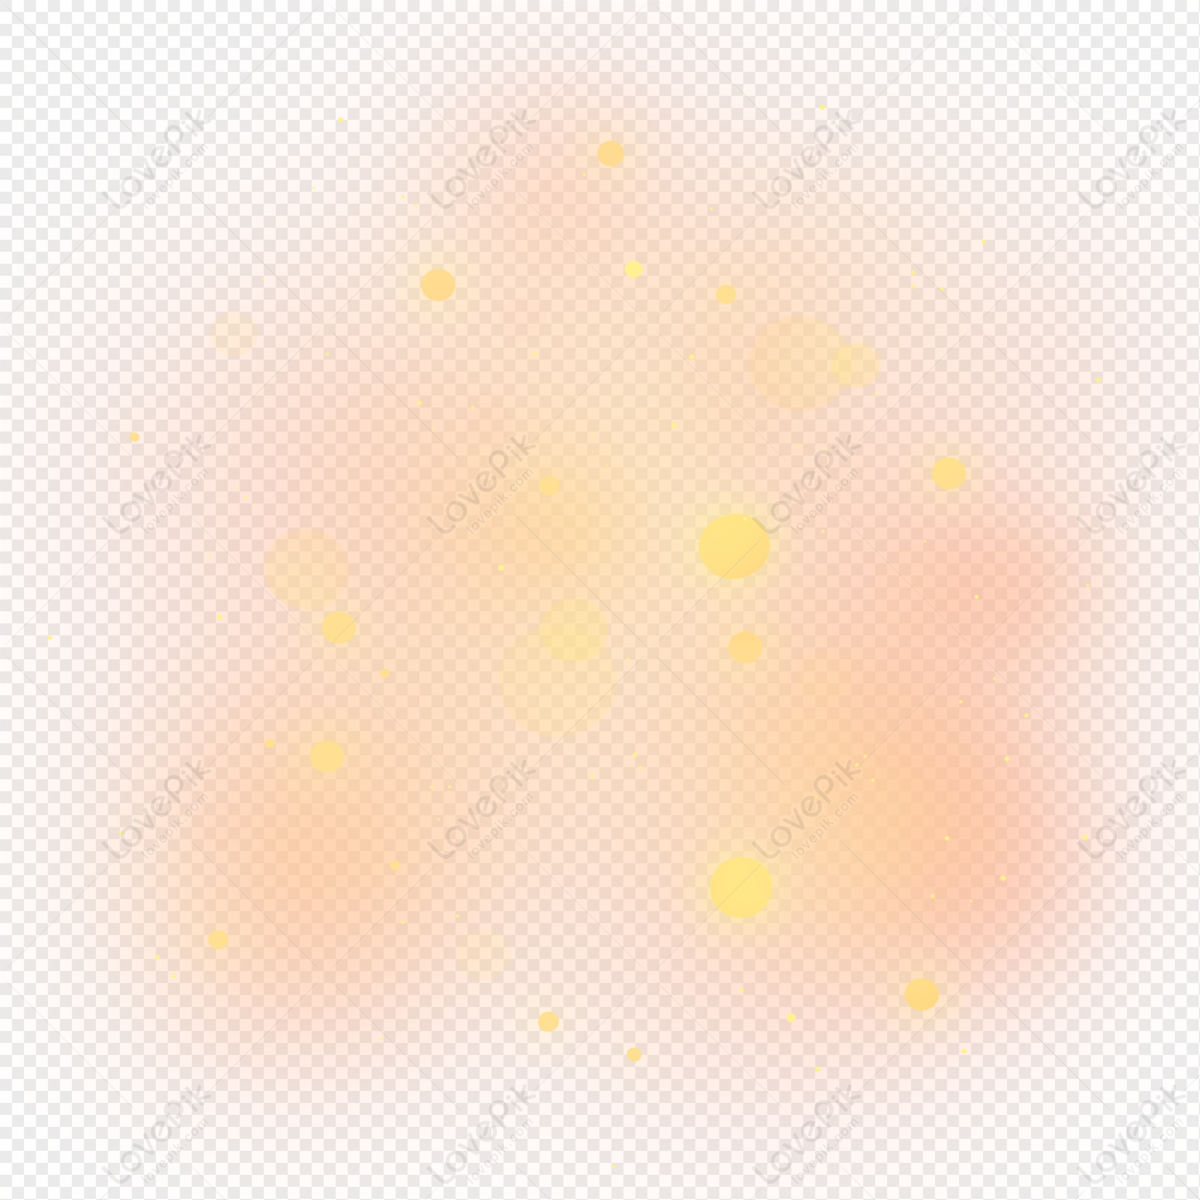 glow effect png